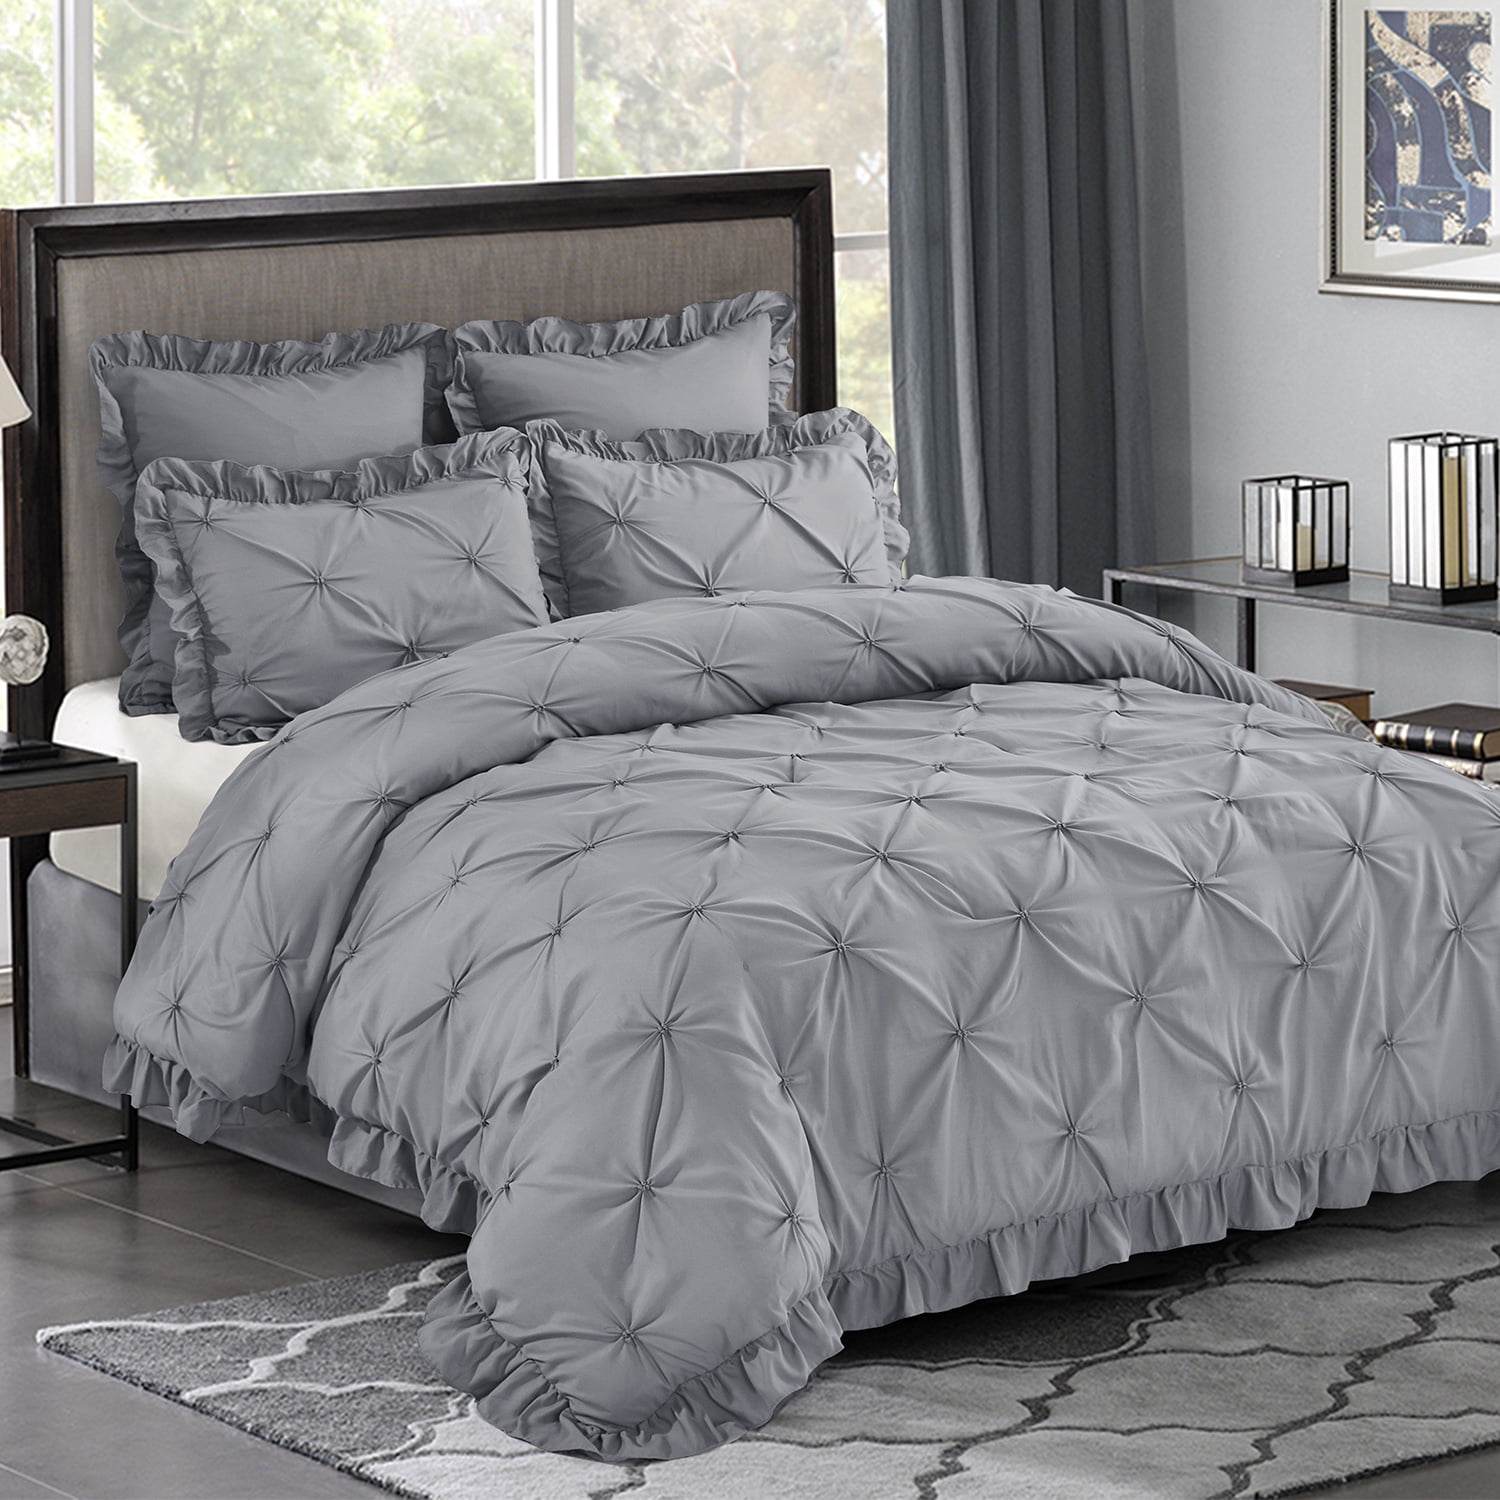 BESTCHIC Grey King Size Comforter Set, 5 Pieces Tufted Bed in a Bag with  Ultra Soft Comforters, Sheets, Pillow Cases and Pillow Shams, Modern Luxury